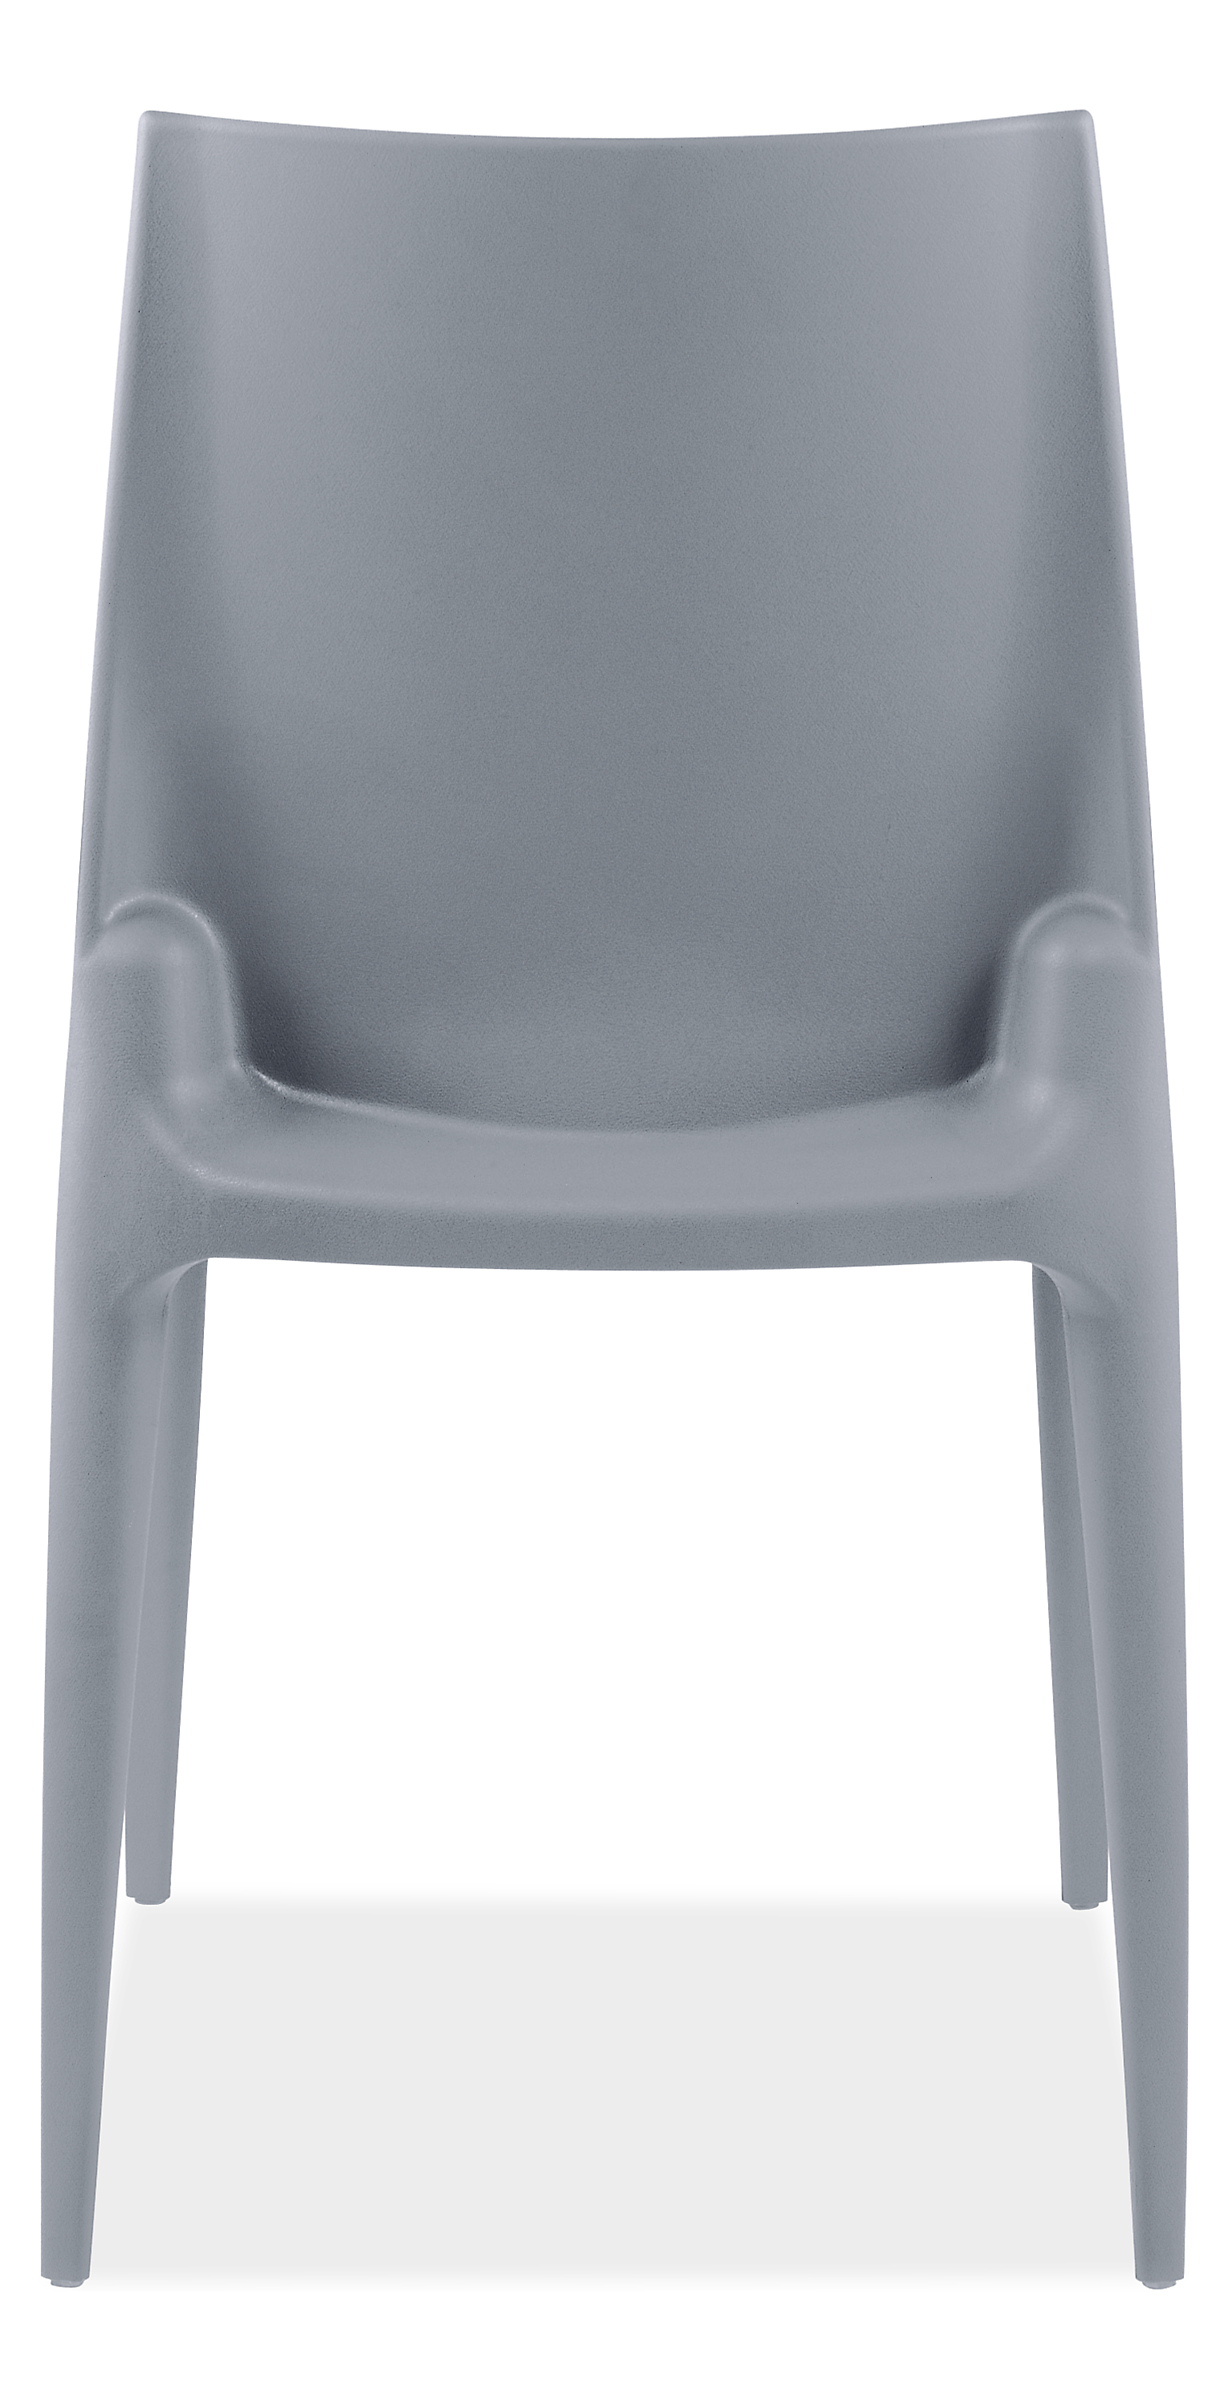 Back view of The Bellini Chair in Dark Grey.